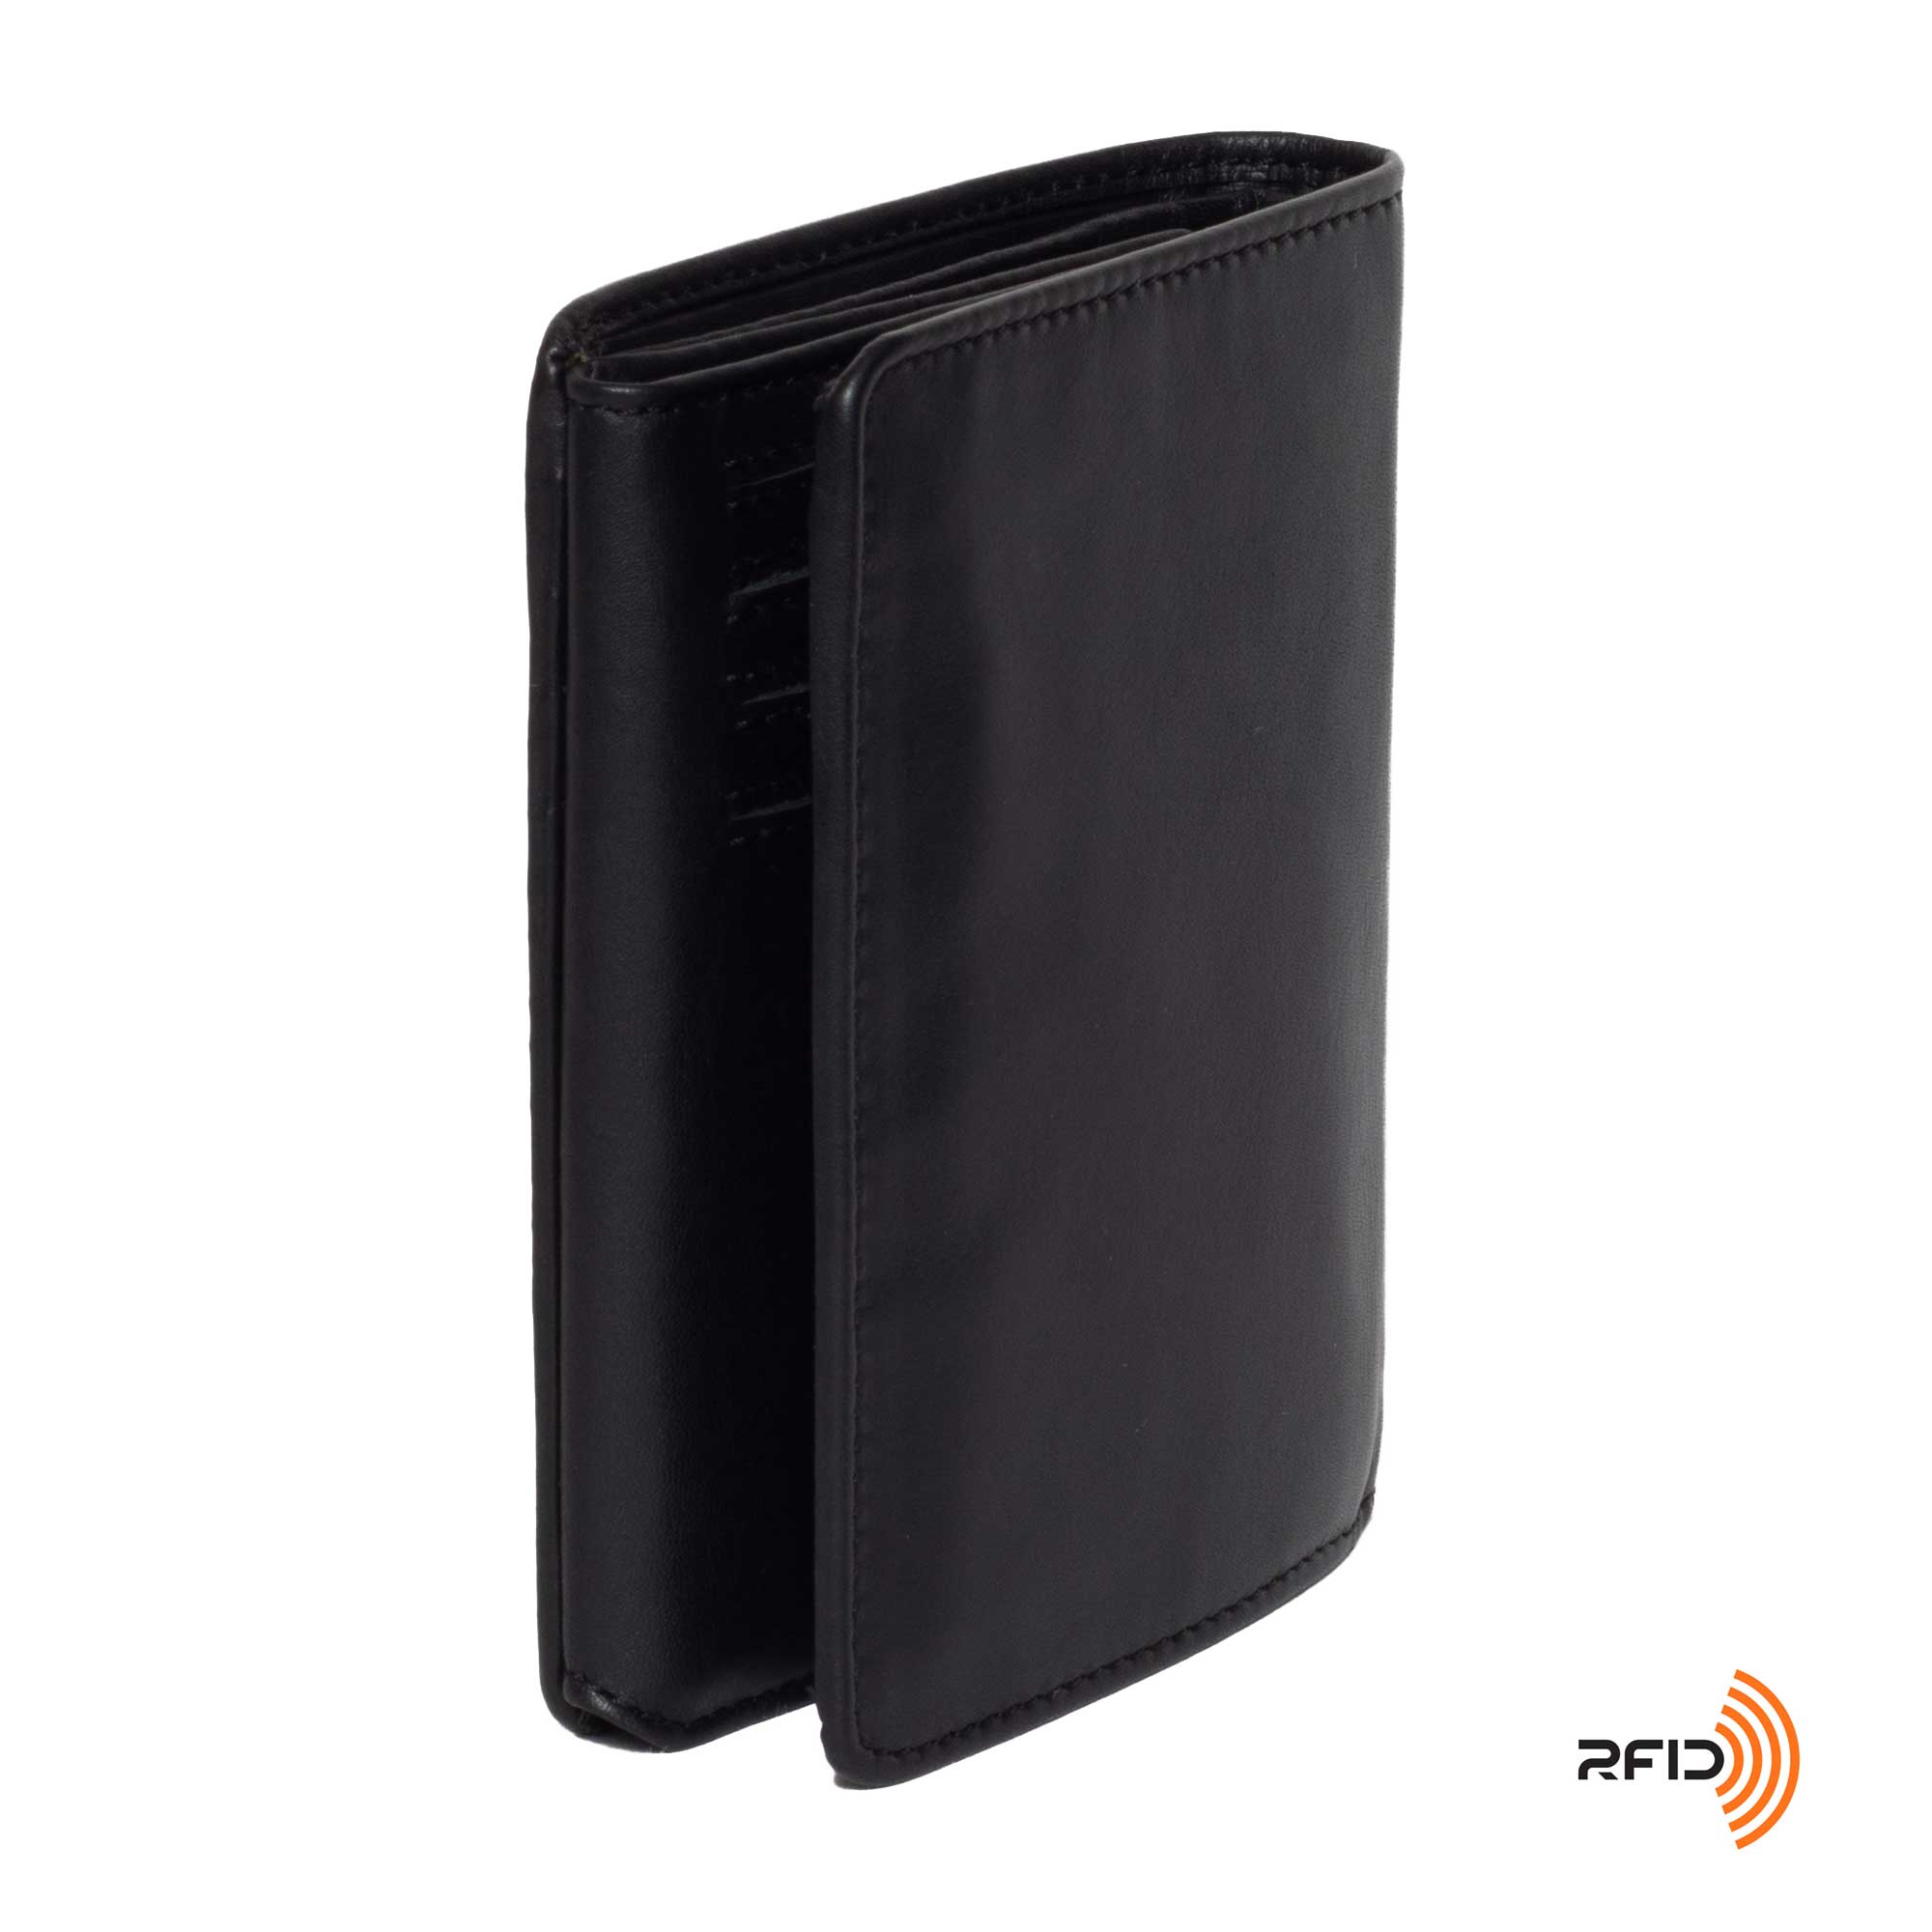 DiLoro Men's Vertical Leather Bifold Flip ID Zip Coin Wallet Black with RFID Protection  - Back, Side View